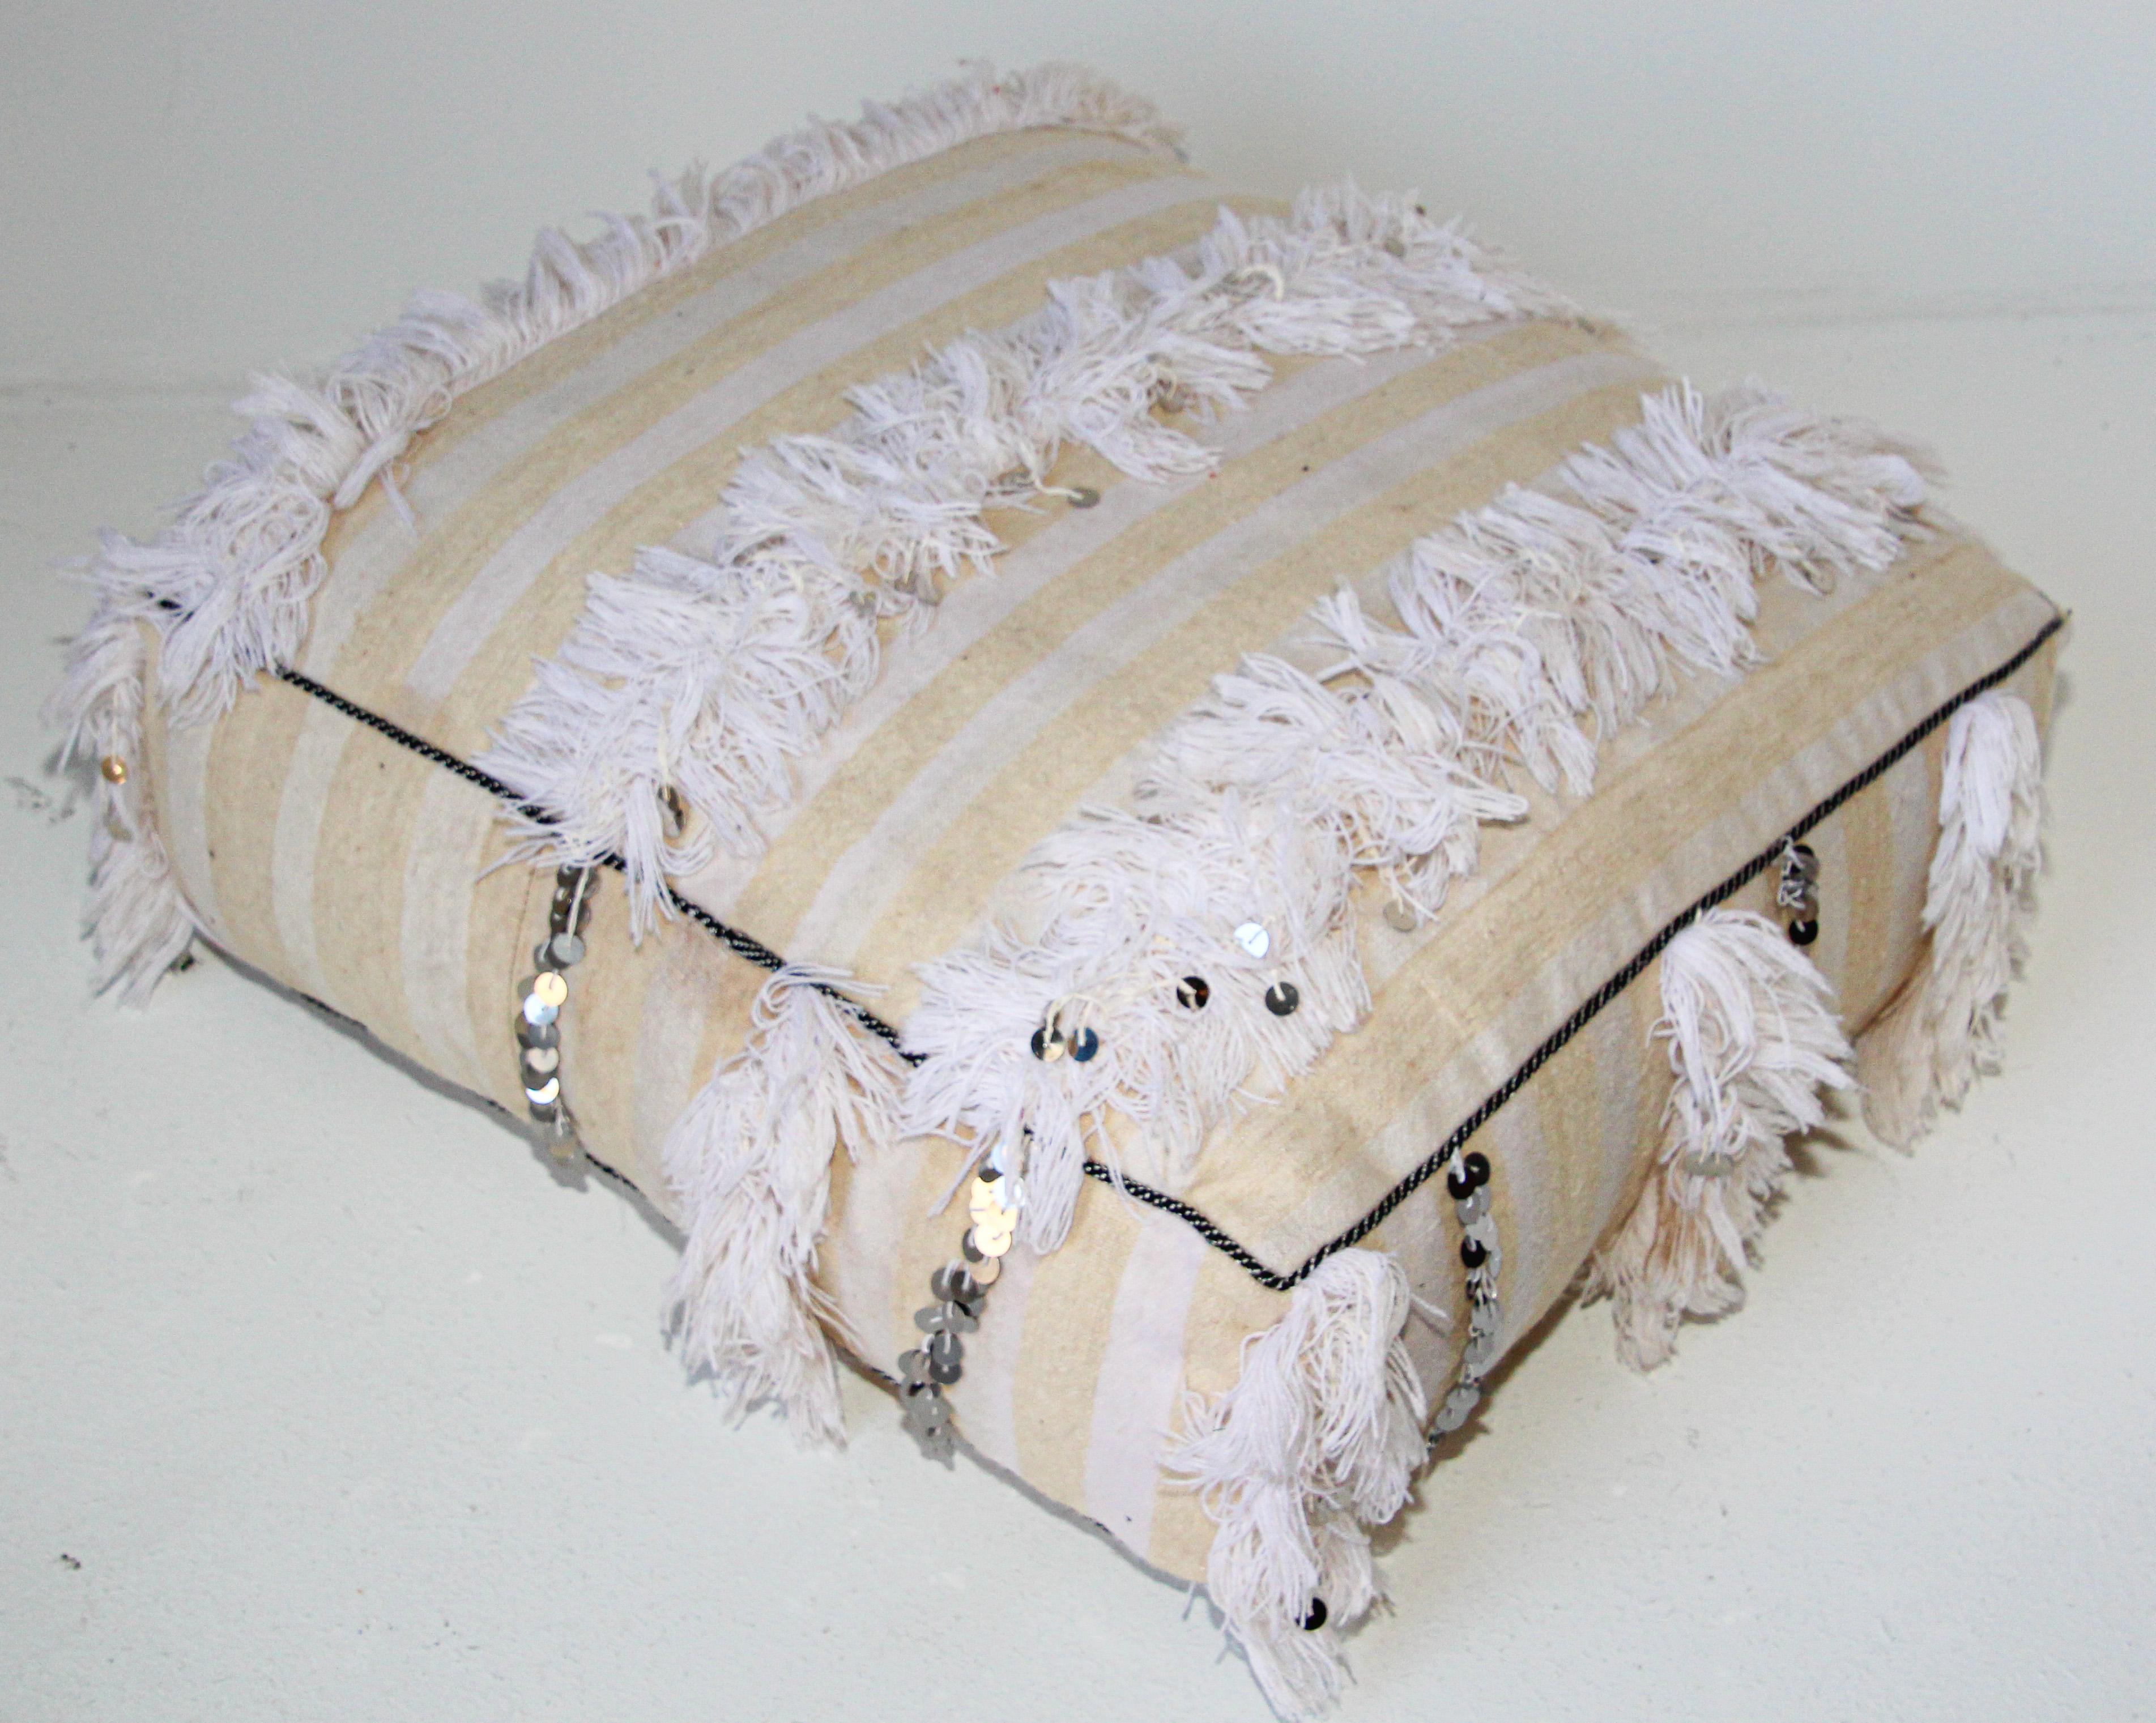 Moroccan wedding floor pillow pouf with silver sequins and long fringes.
Bohemian handcrafted vintage Moroccan tribal floor pillow or pouf made from a traditional handwoven white wool and cotton throw used by the Berber women in Morocco for their